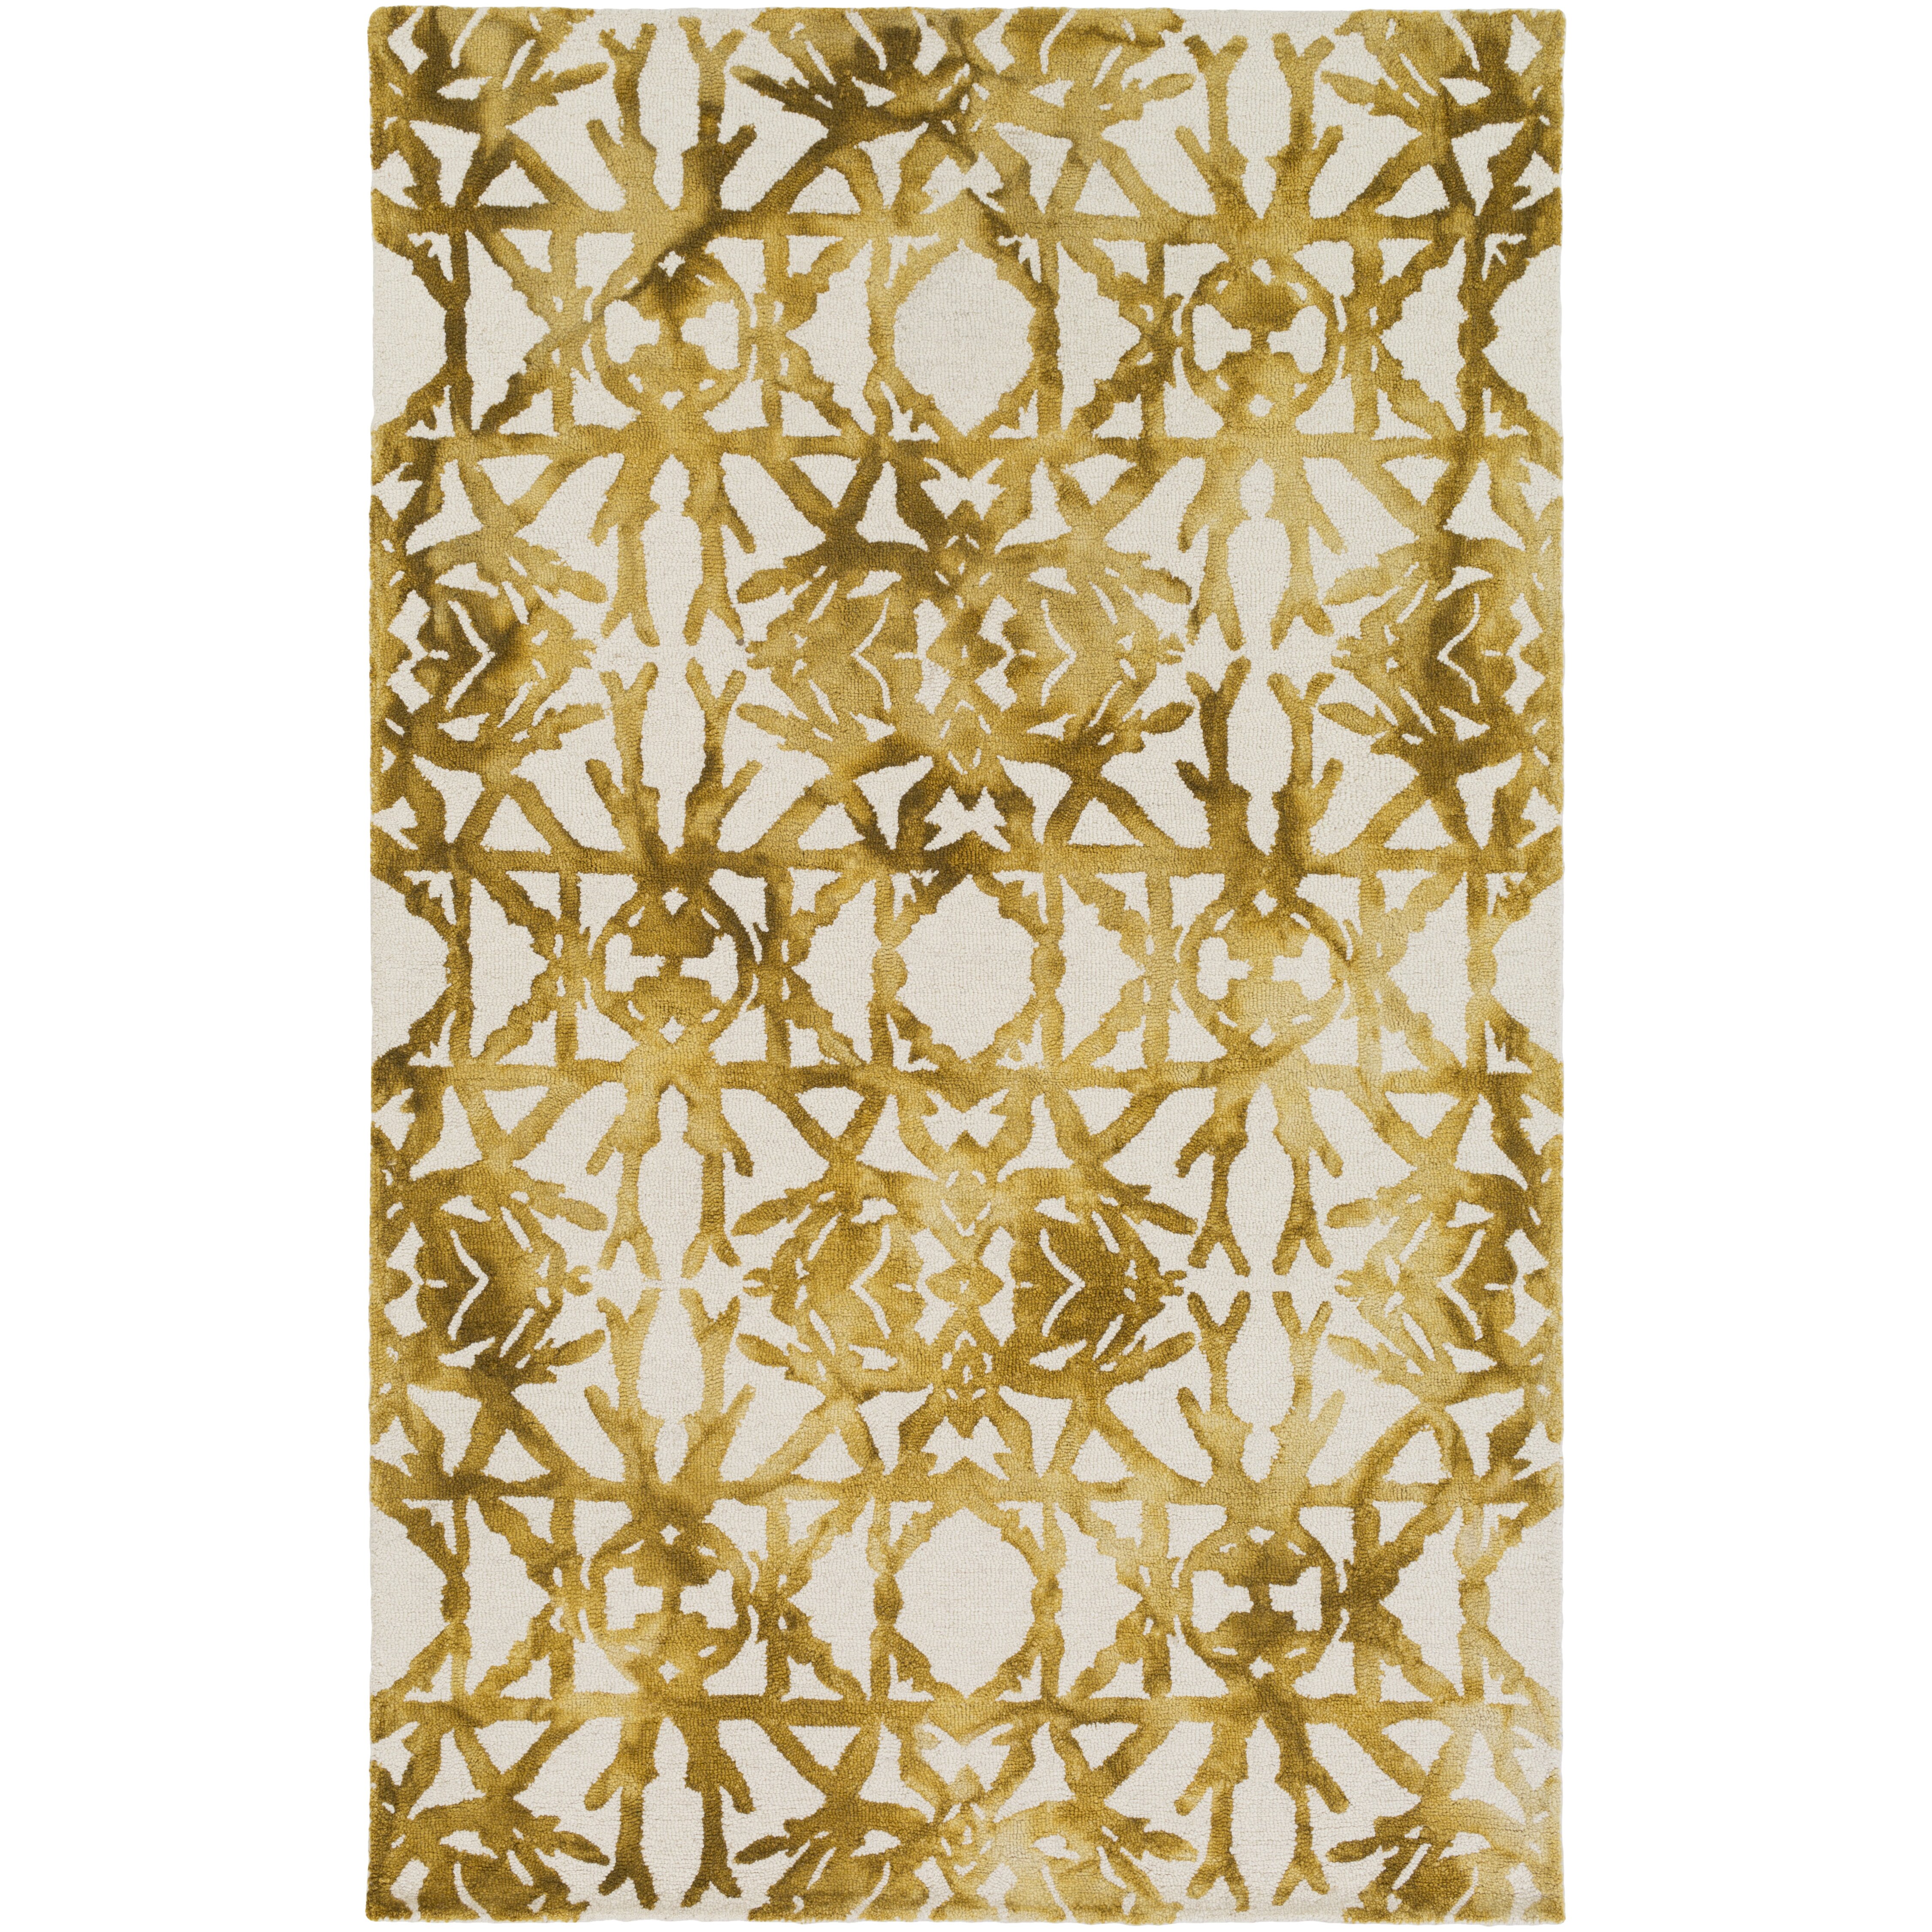 Organic Avery Hand Tufted Gold f White Area Rug